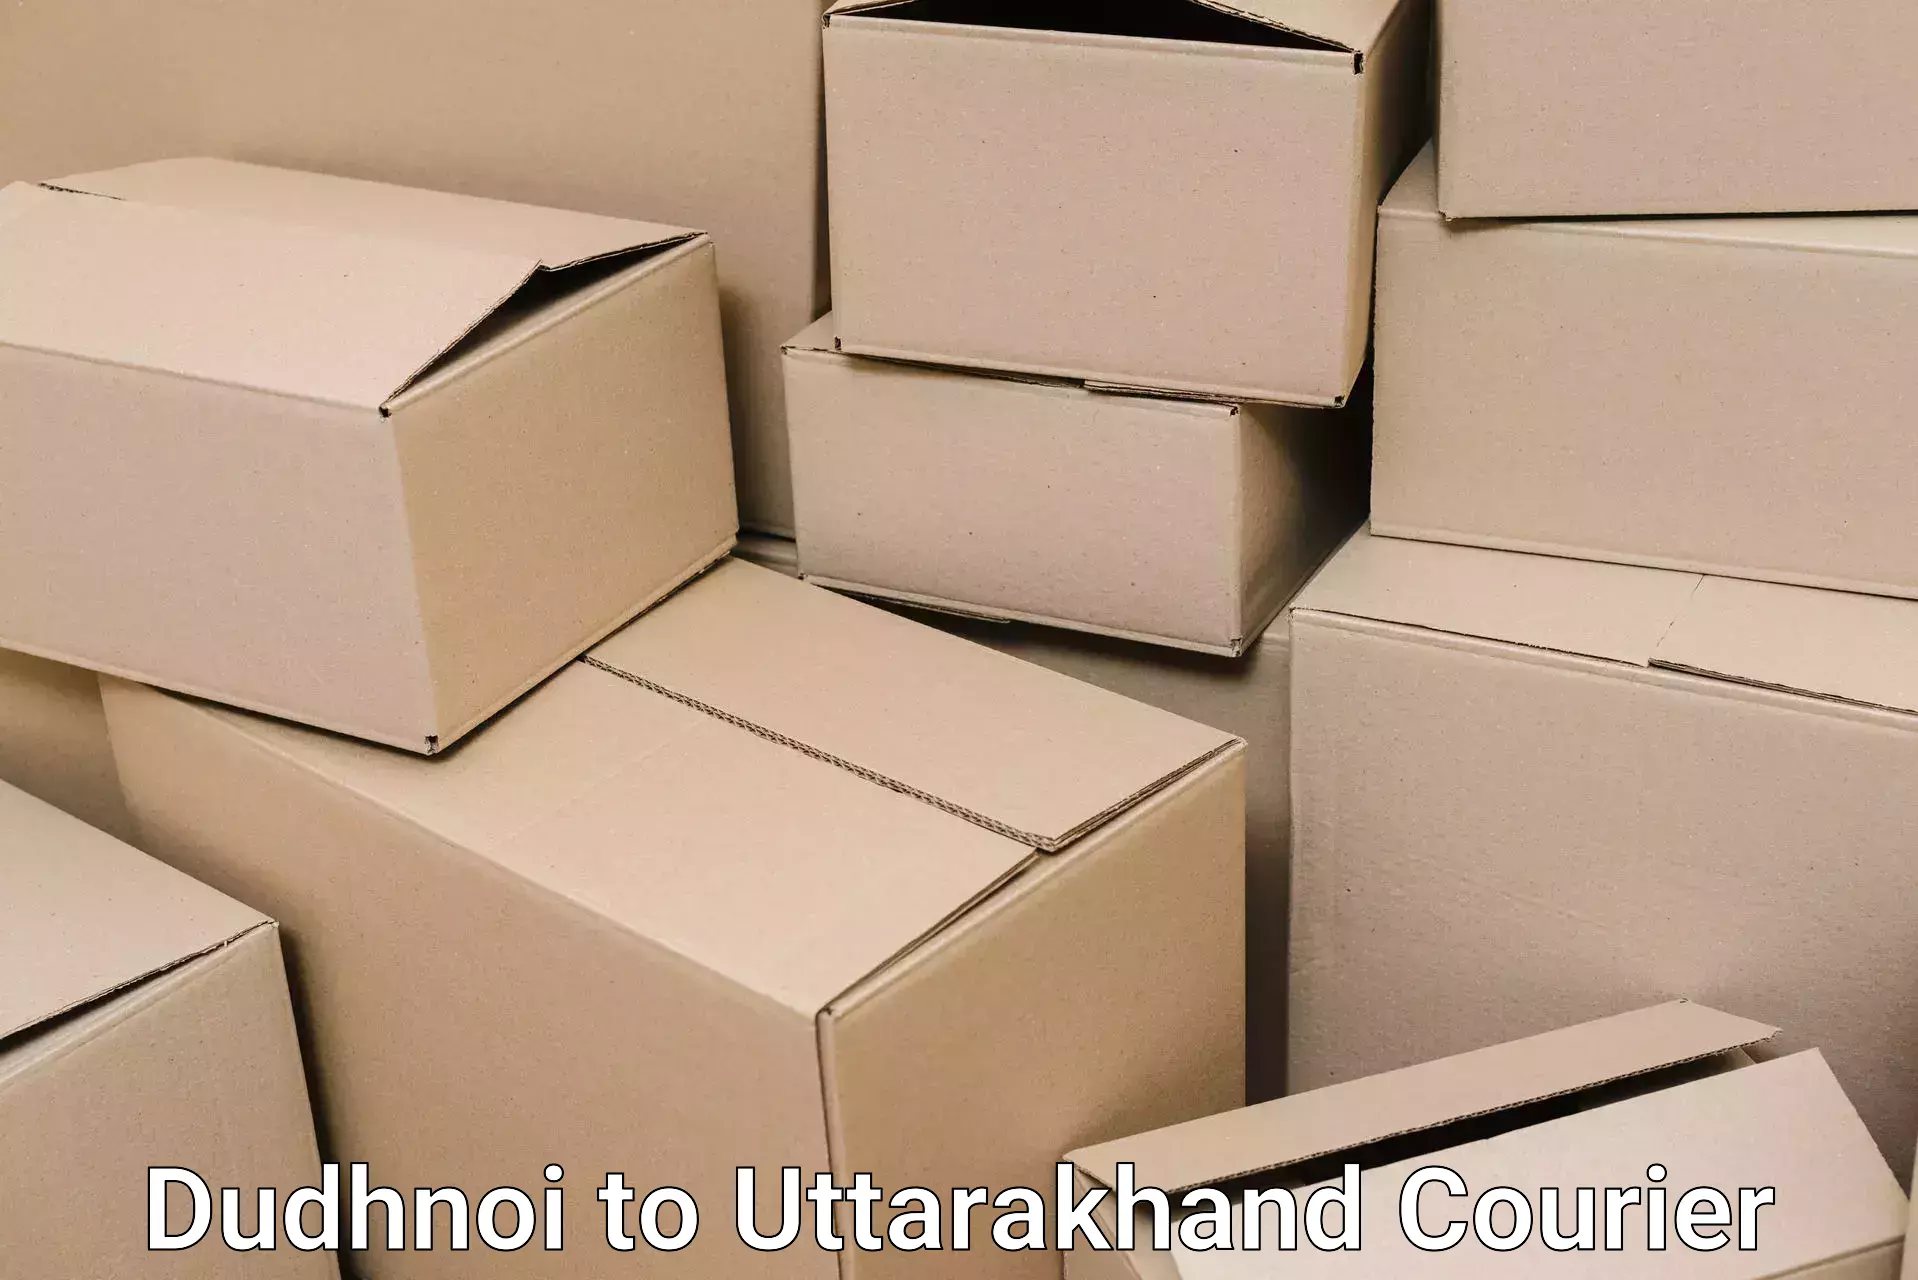 Furniture delivery service Dudhnoi to Uttarakhand